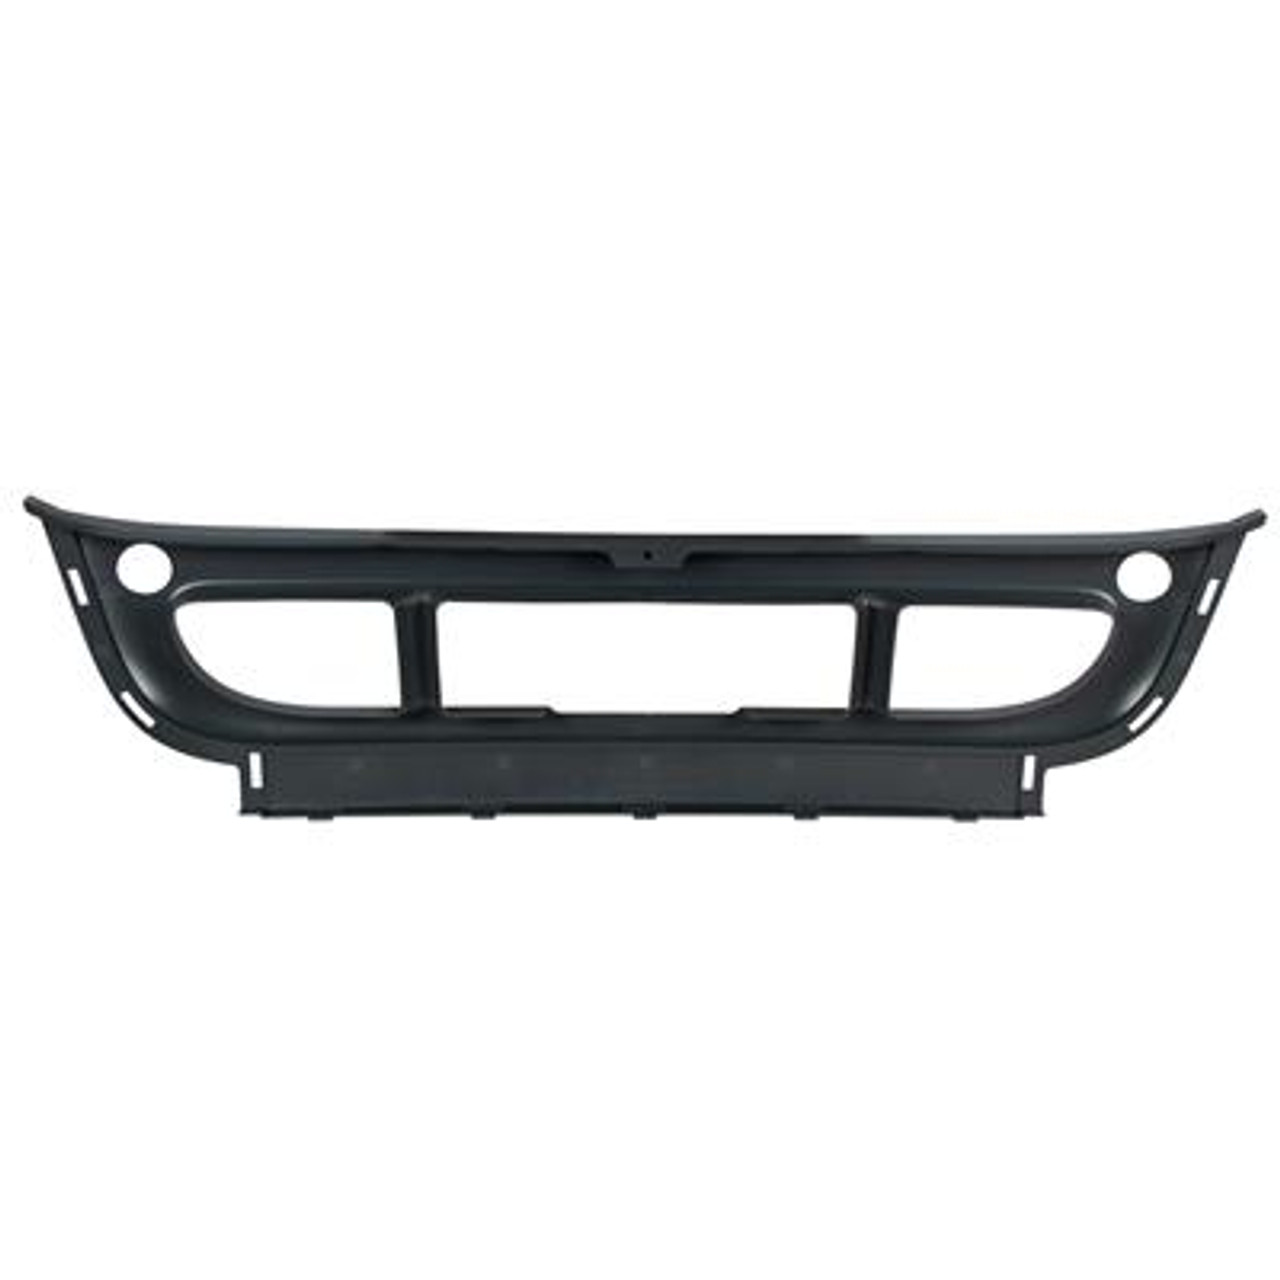 Center Bumper Without Center Trim Mounting Holes For 2008-2017 Freightliner Cascadia (Box Of 5)